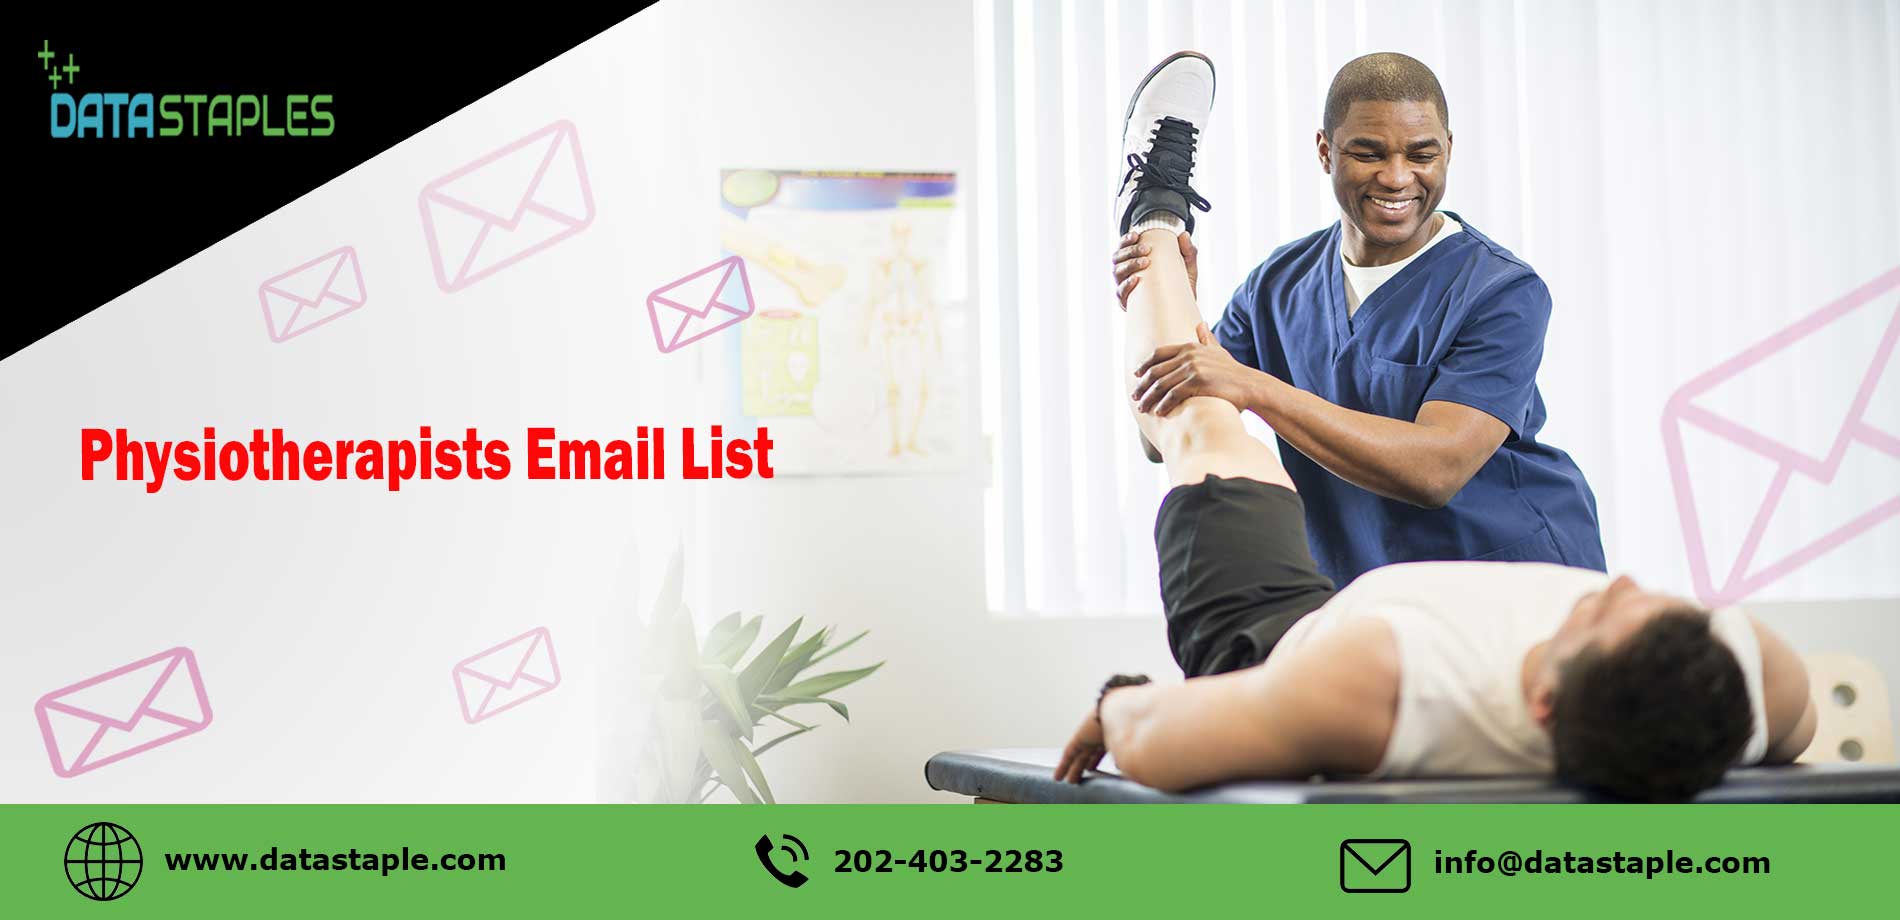 Physiotherapists Email List | DataStaples